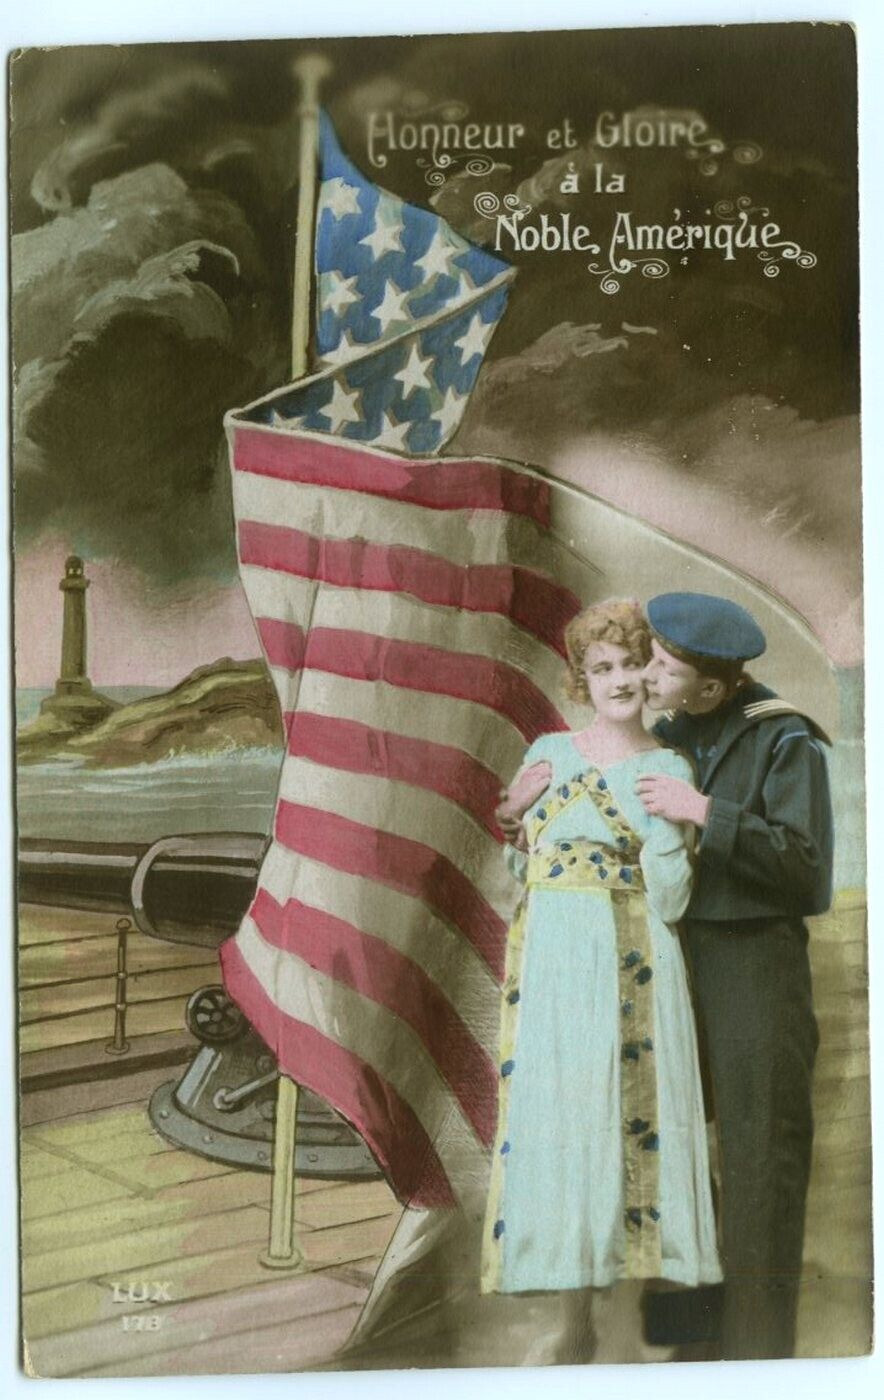 Honor & Glory to Noble America Sailor and Woman American Flag Patriotic Postcard